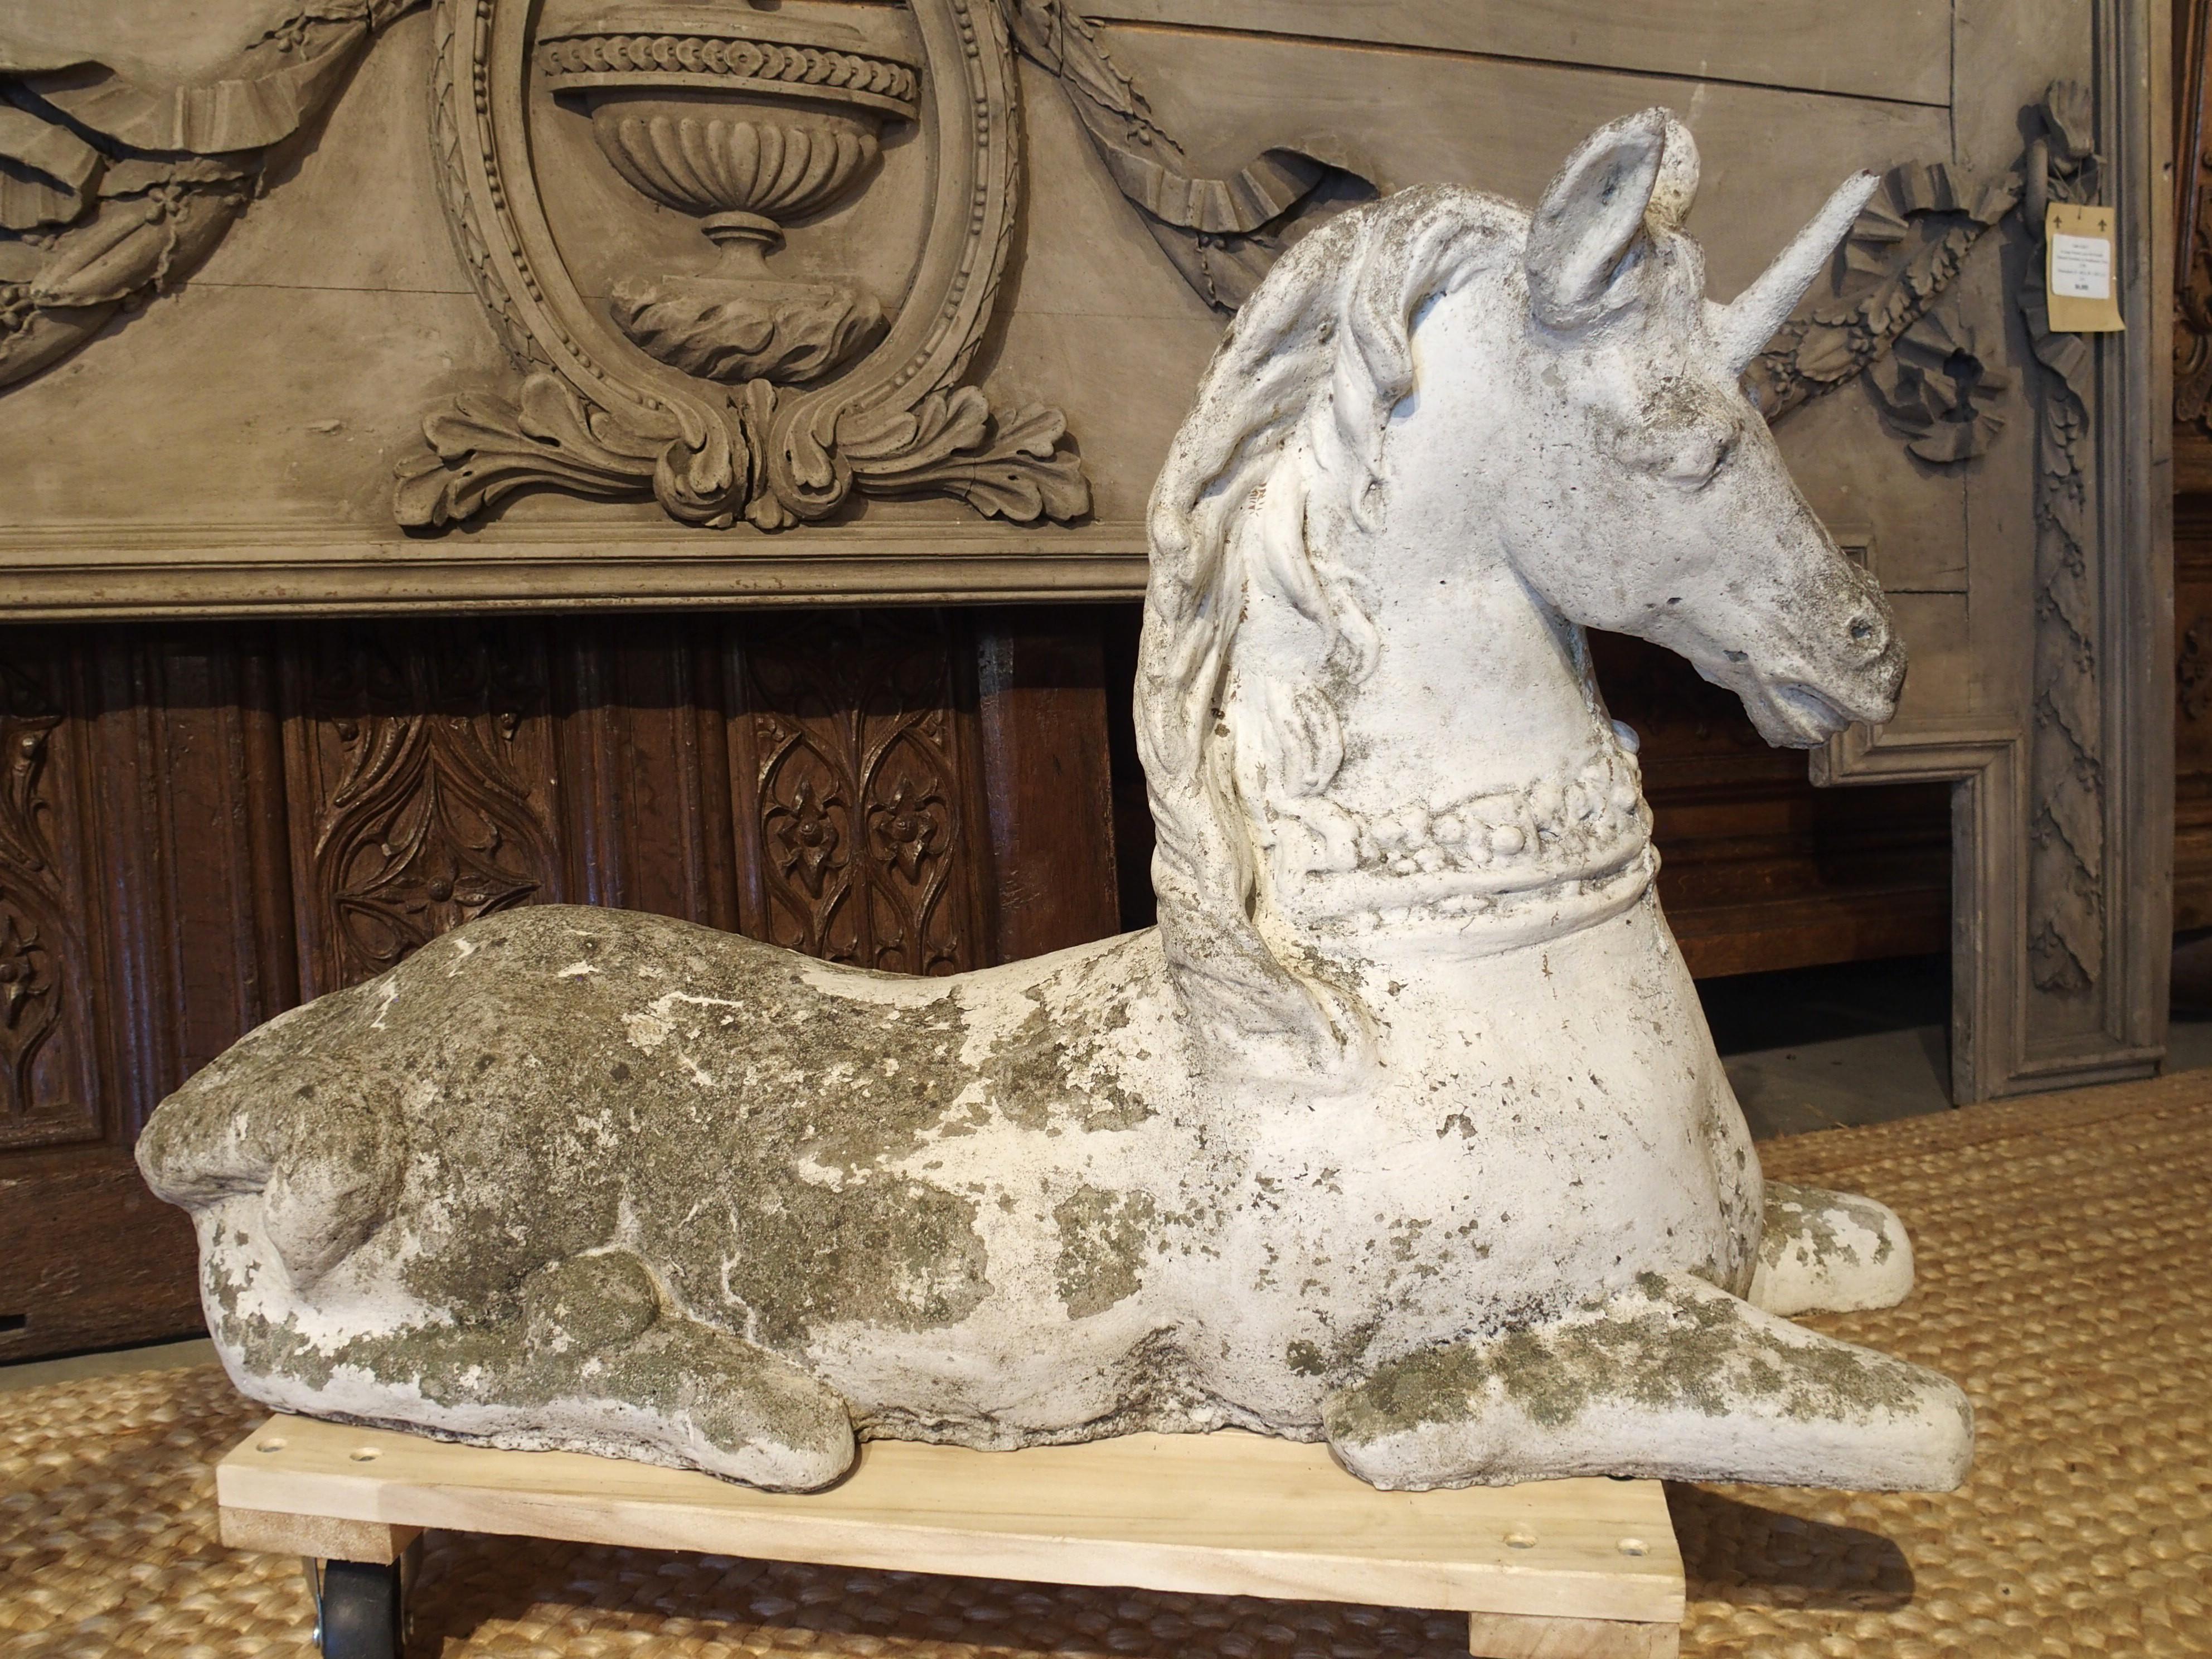 Cast in Belgium, circa 1960, this cement unicorn features a fabulously weathered white-painted finish. Acceptable losses to the paint have revealed areas of the gray-colored stone, which have developed a black and green patination. The unicorn is